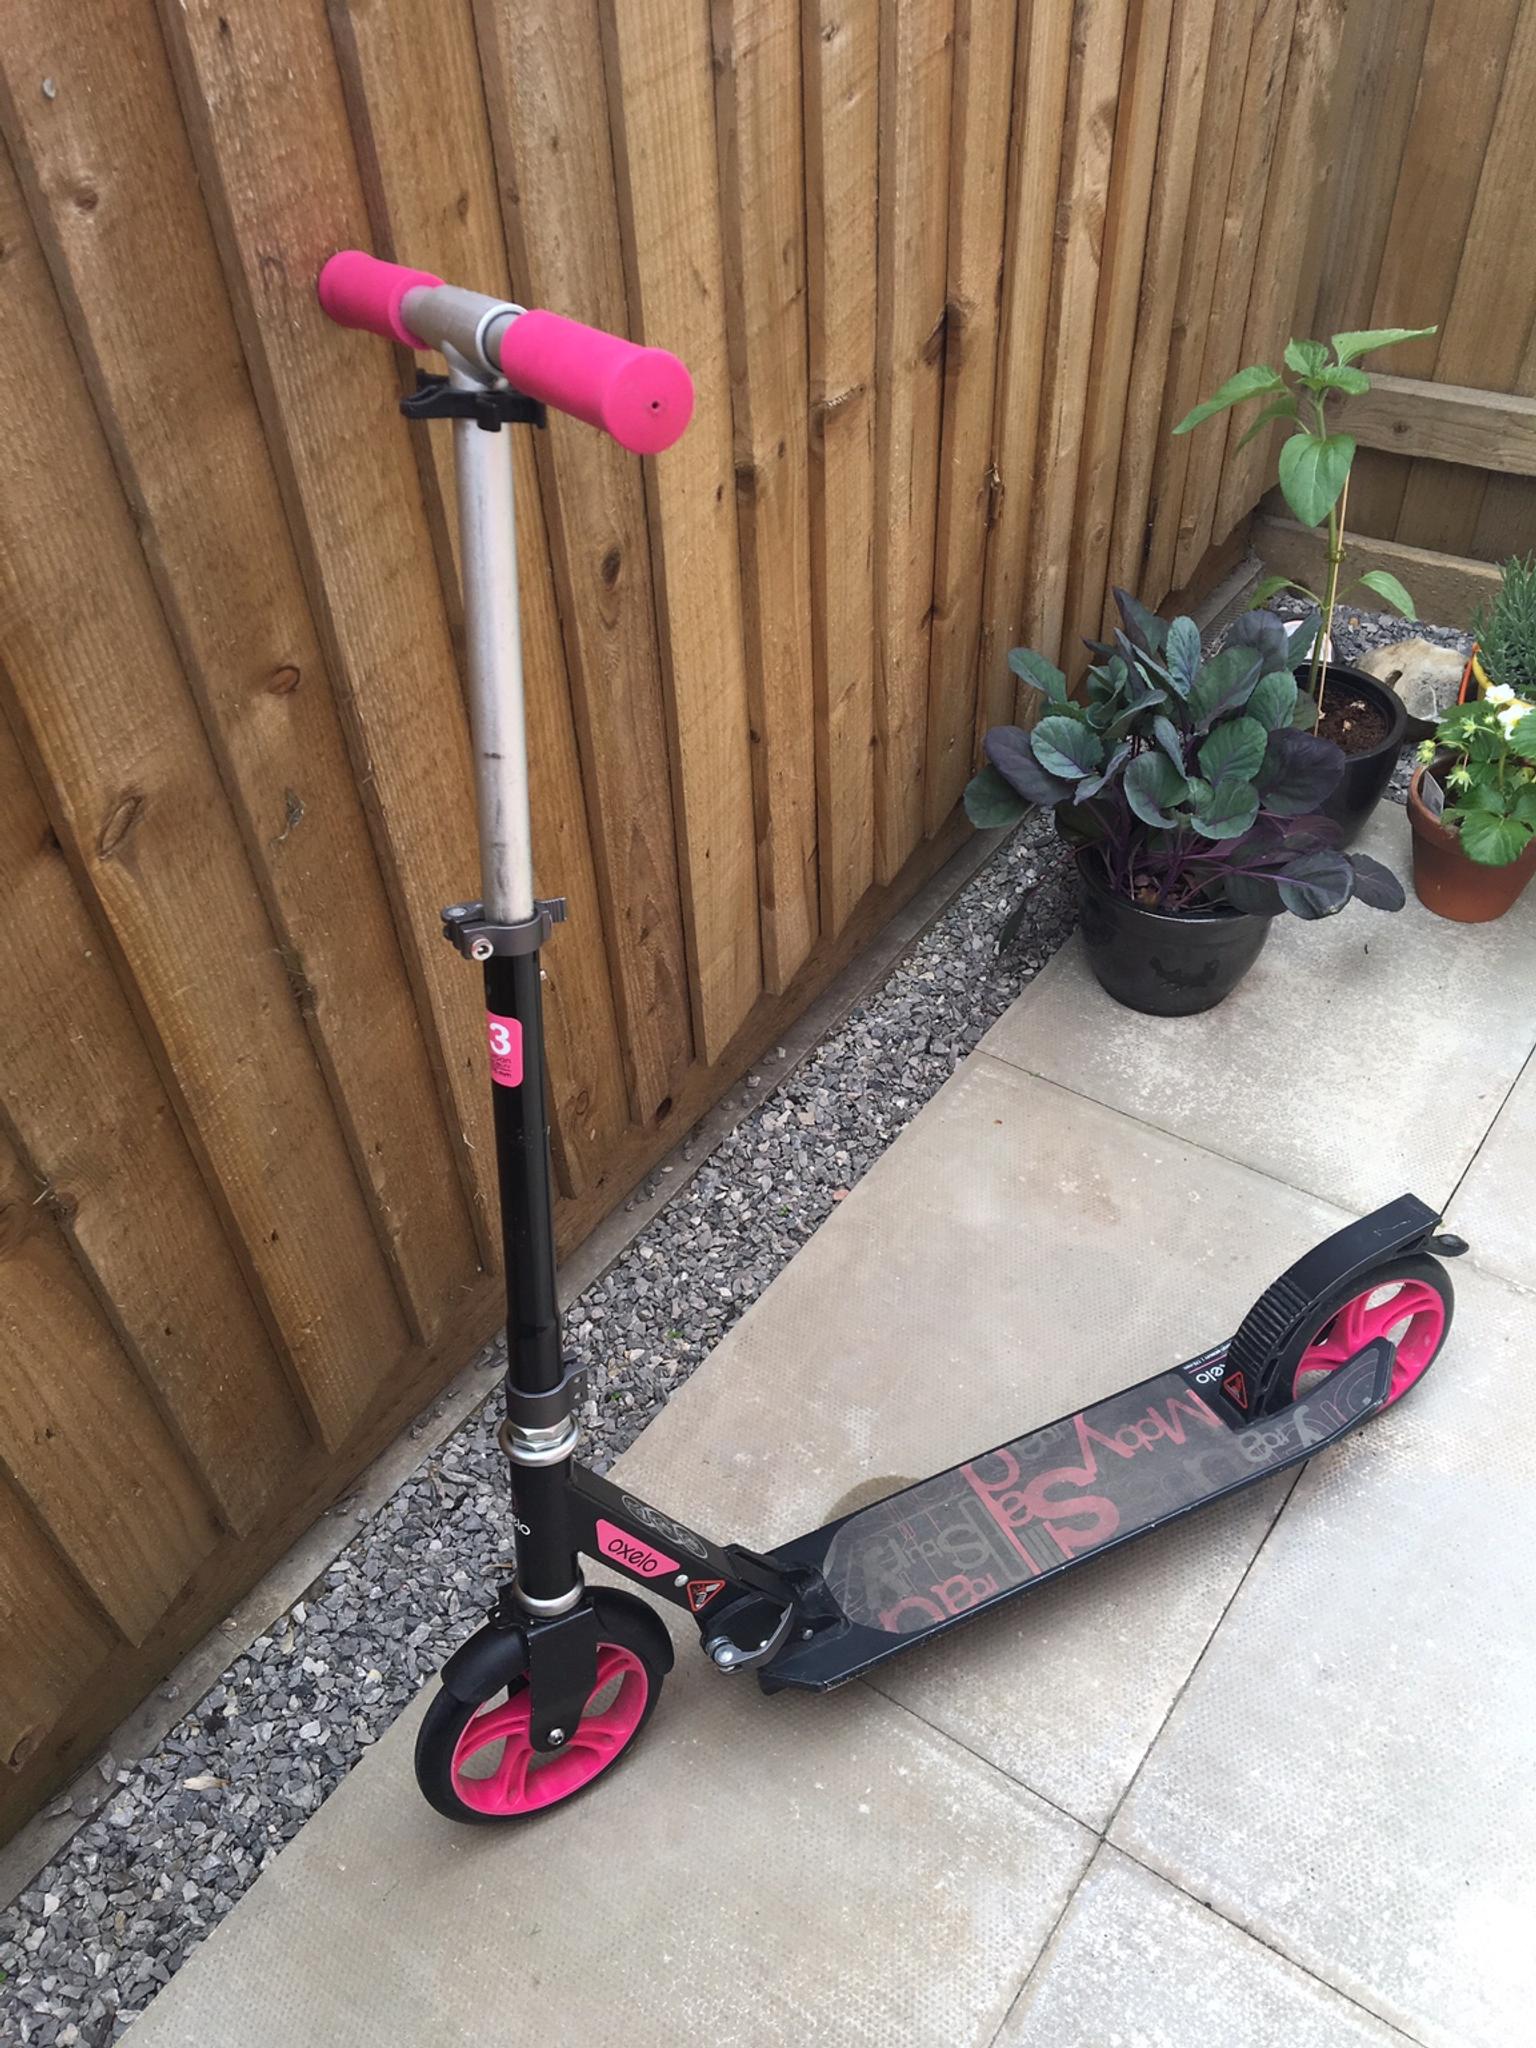 decathlon scooters oxelo